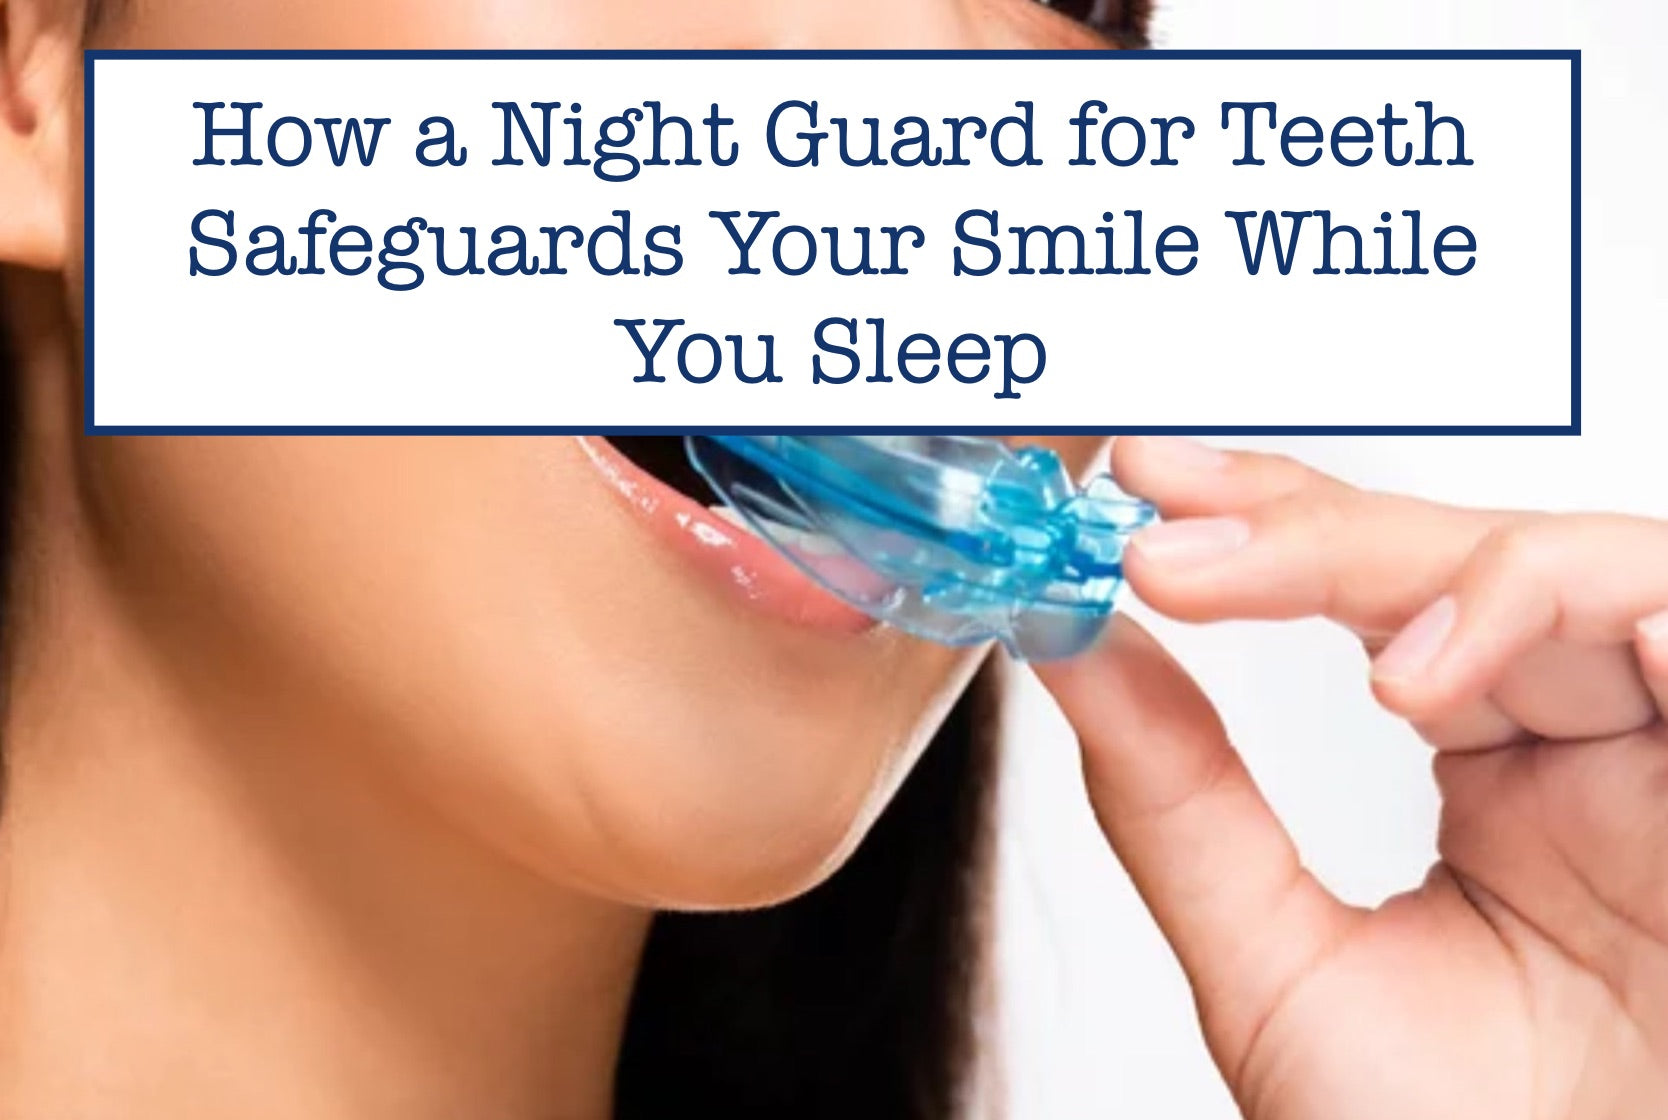 How a Night Guard for Teeth Safeguards Your Smile While You Sleep